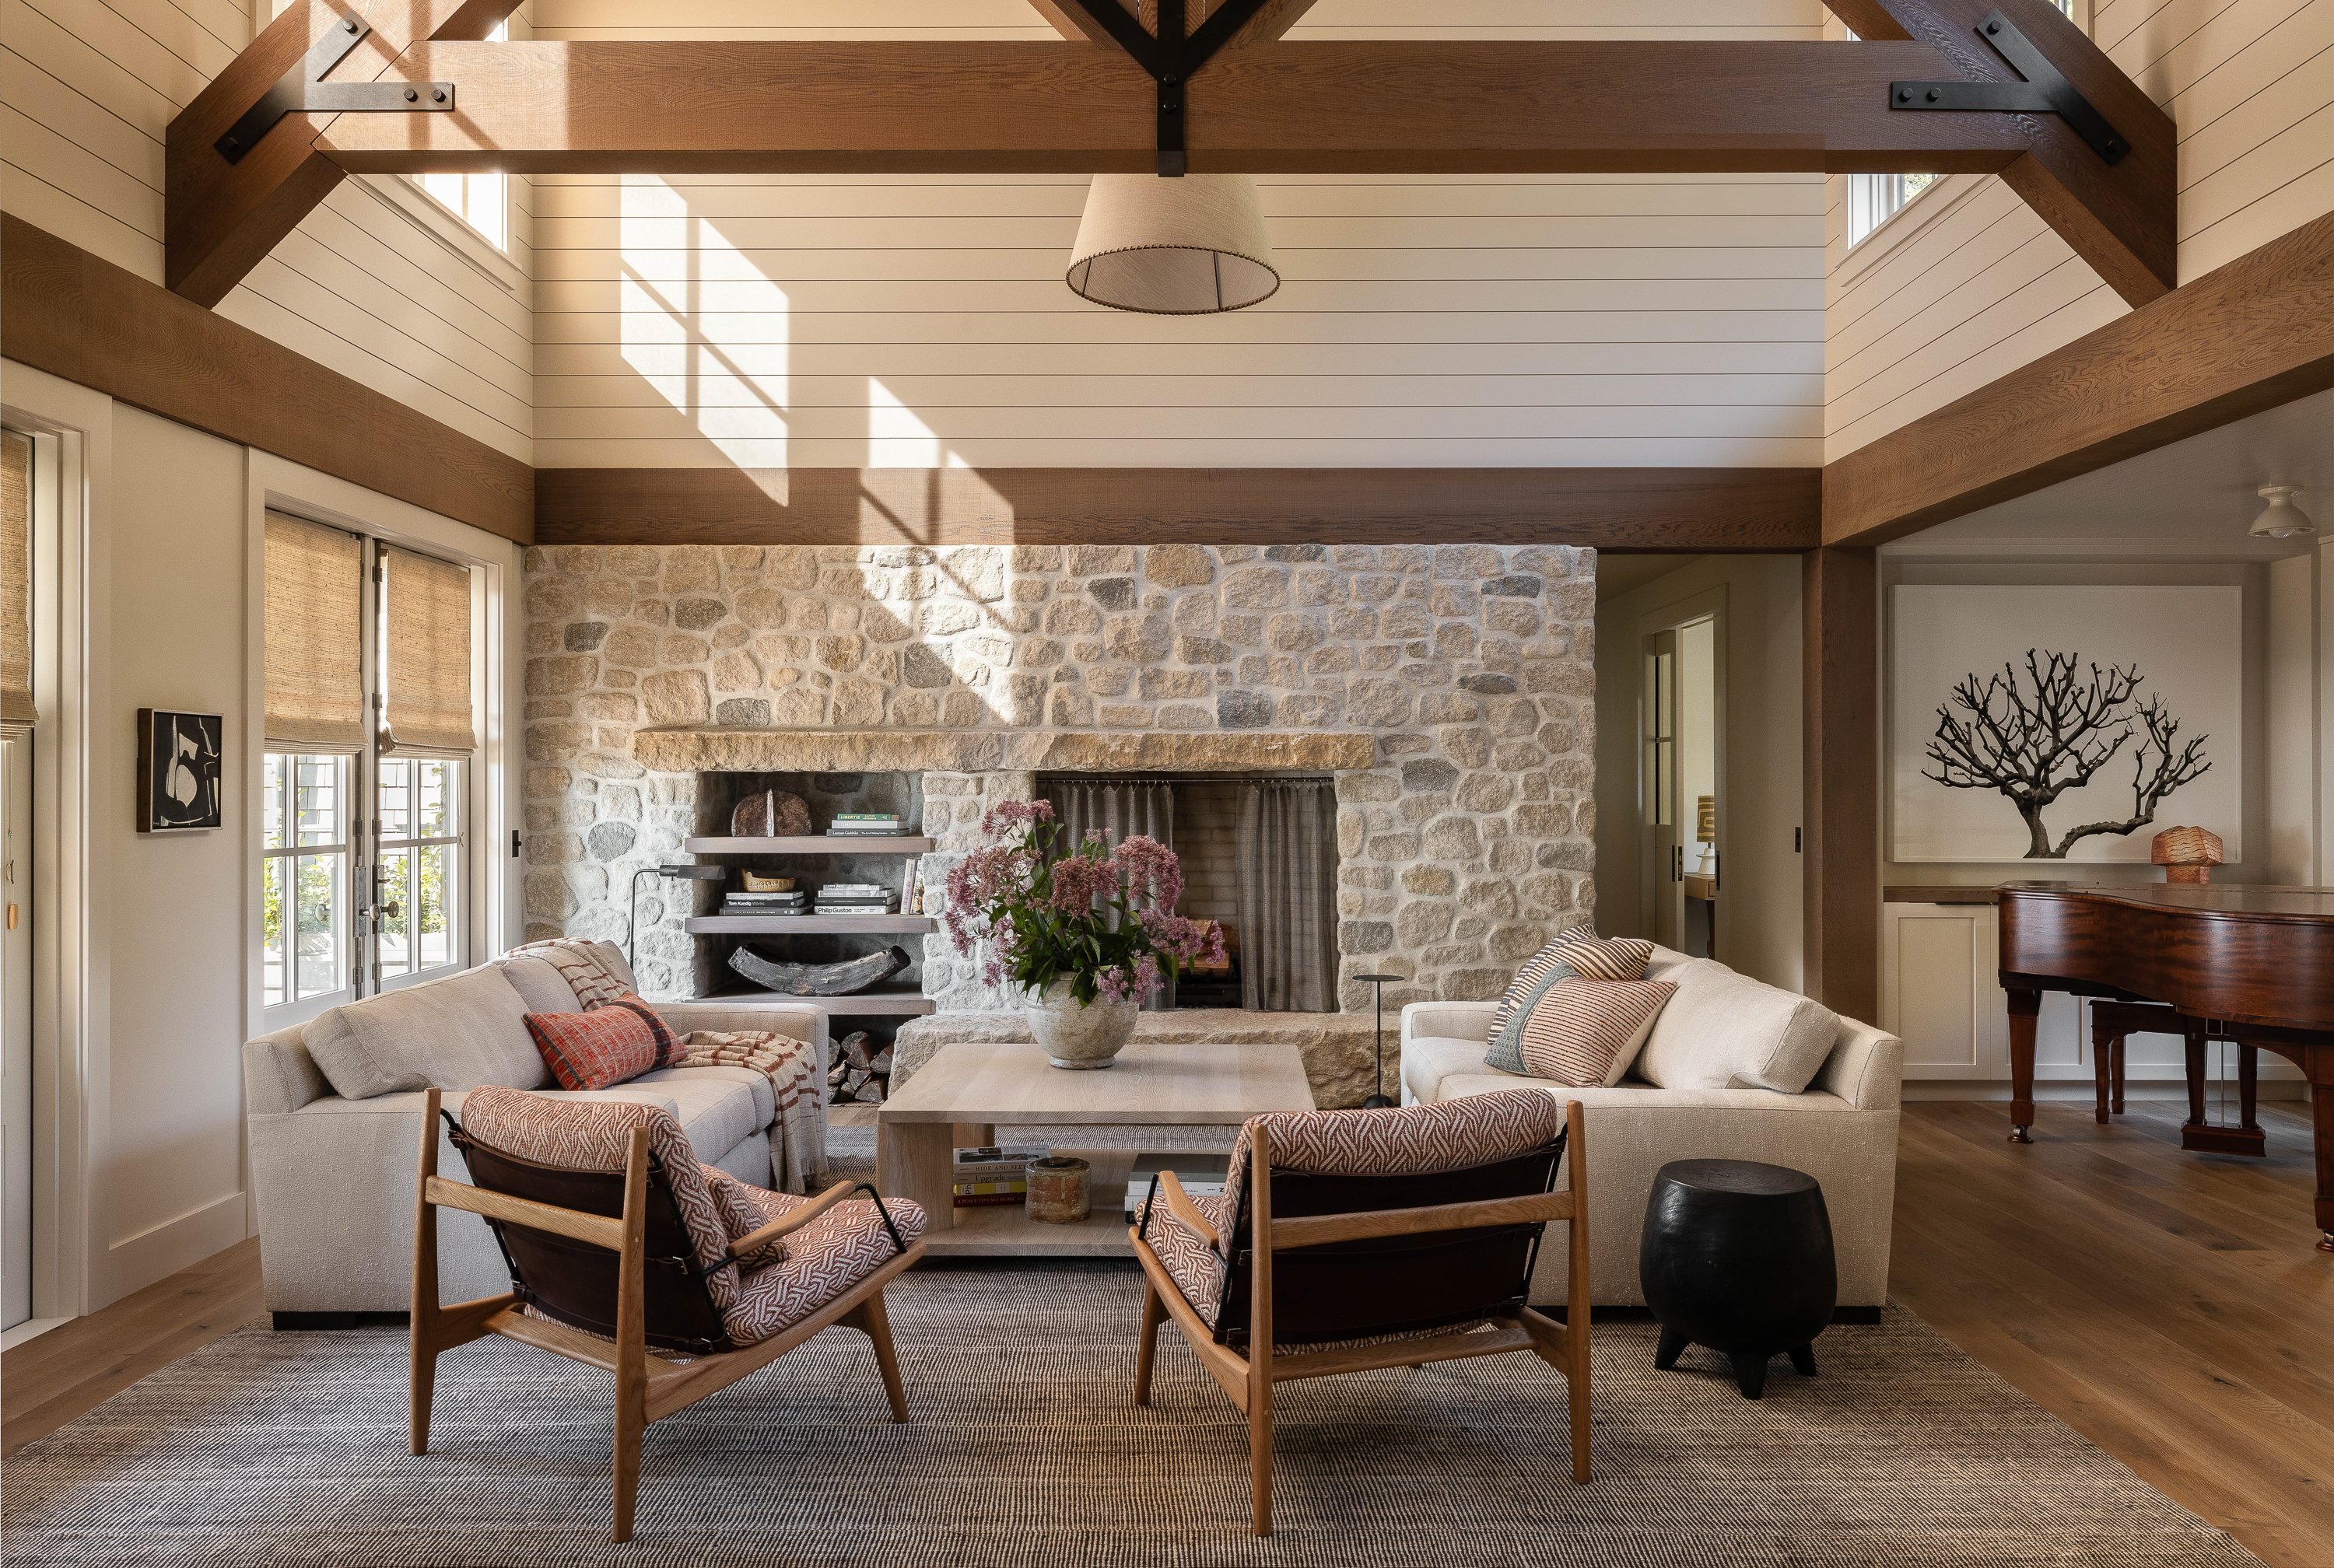 The living room showcases an open design concept, accentuated by large timber trusses that add a sense of grandeur and rustic charm to the space.